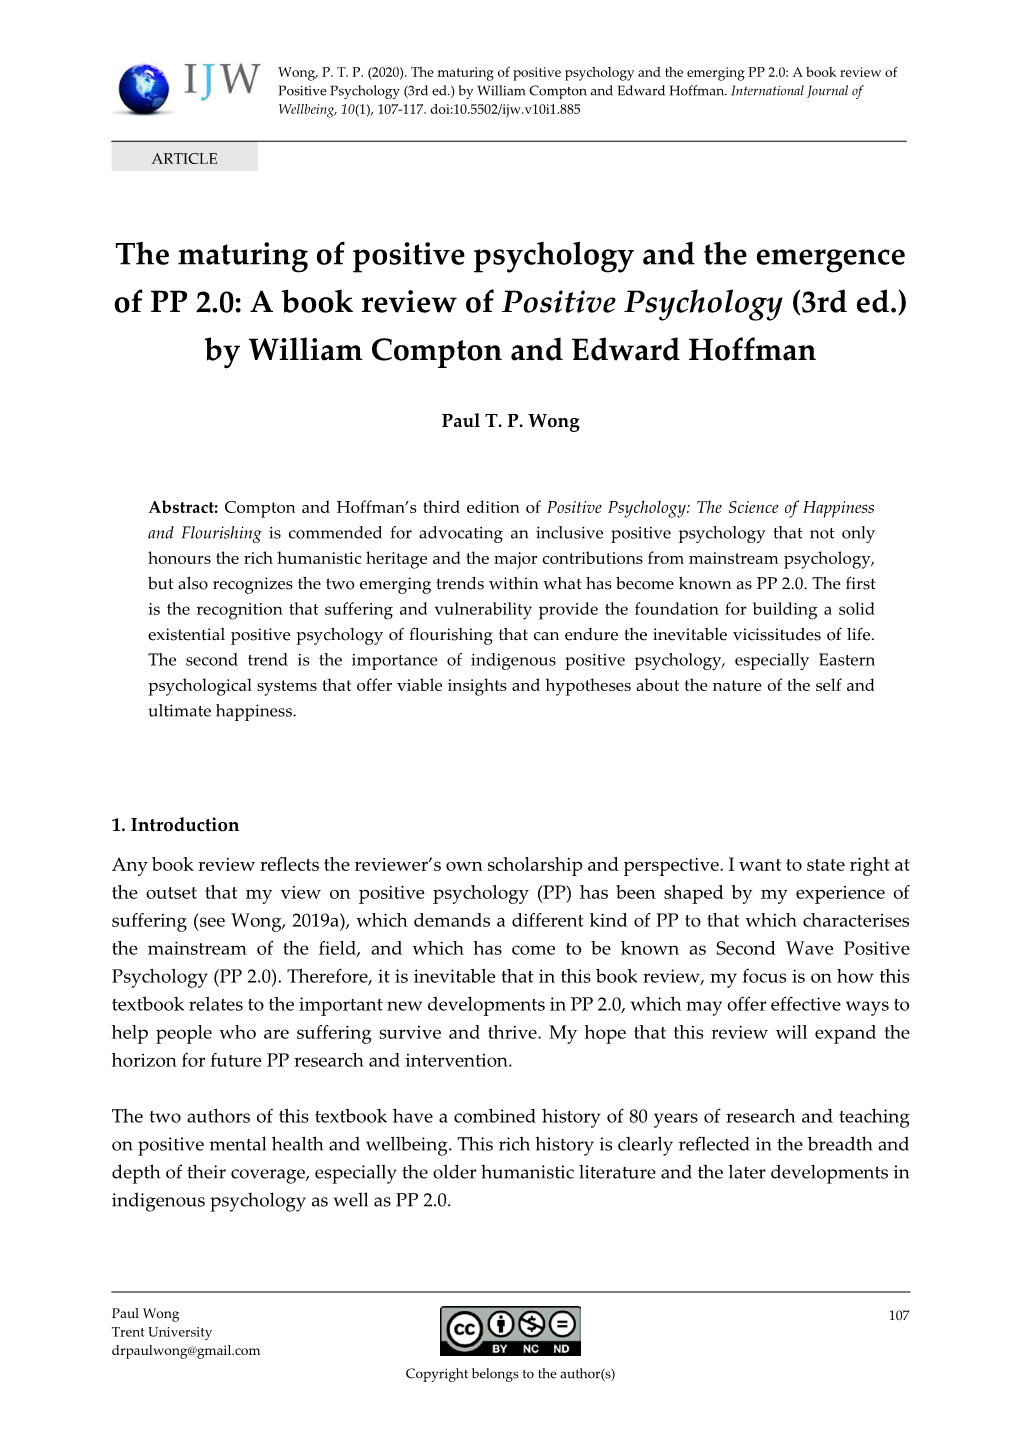 The Maturing of Positive Psychology and the Emergence of PP 2.0: a Book Review of Positive Psychology (3Rd Ed.) by William Compton and Edward Hoffman